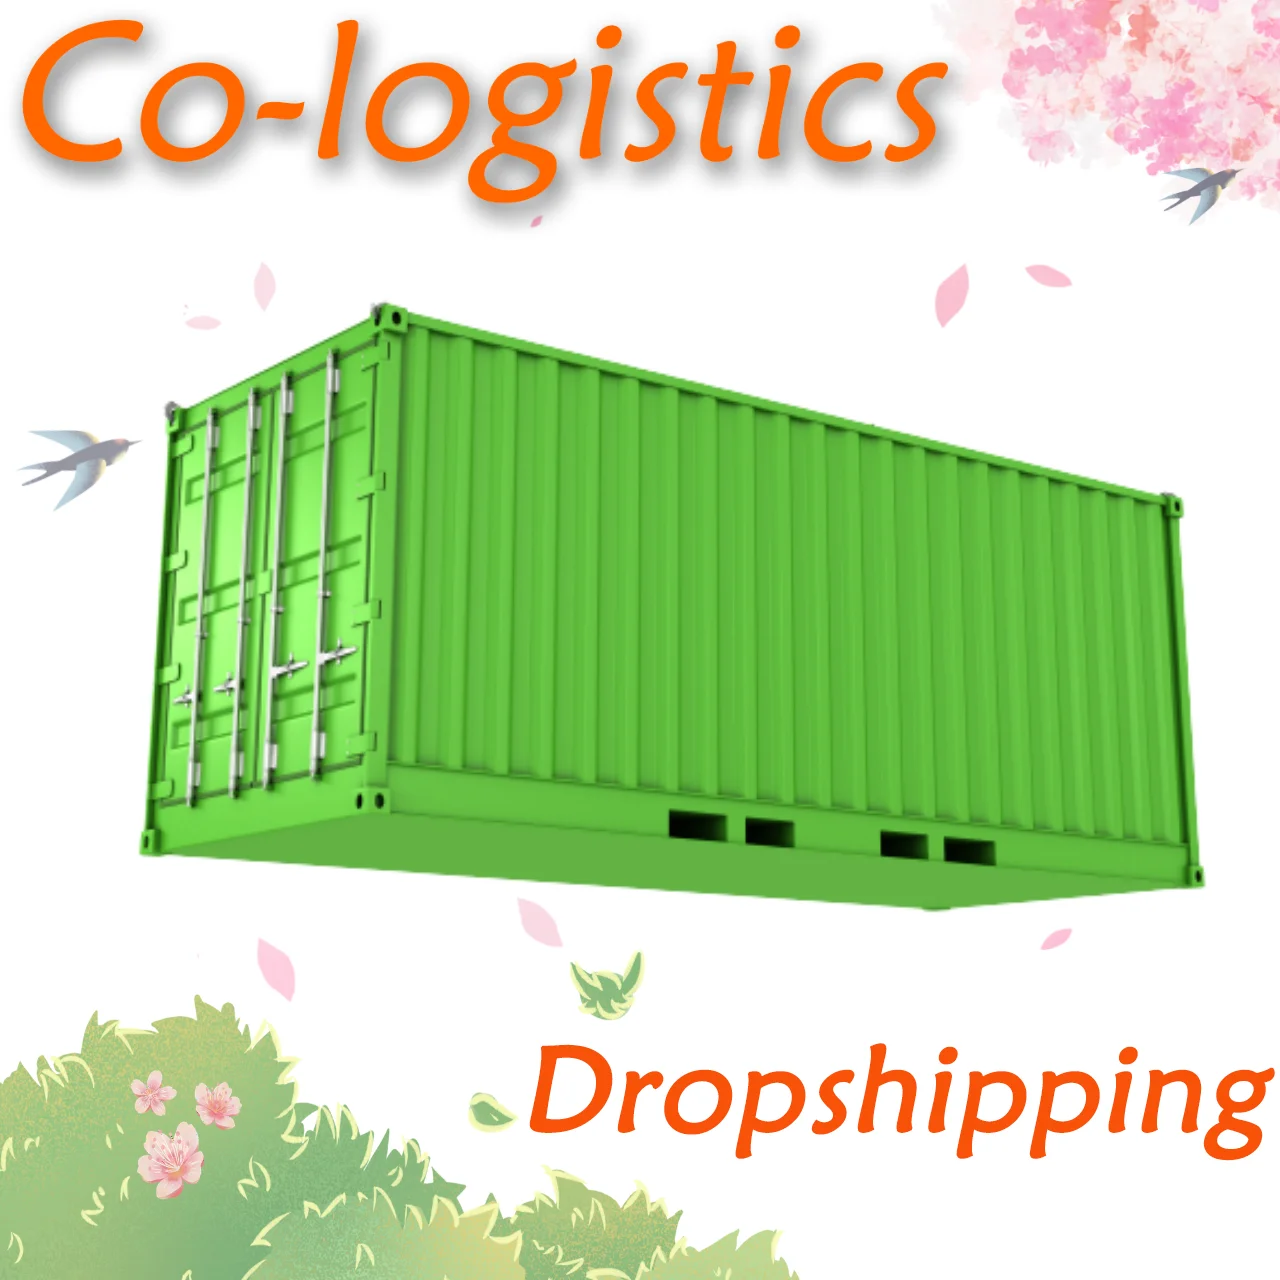 FCL rail container agent cargo DDP20GP 40HQ  from China to Europe shipping agent logistics service